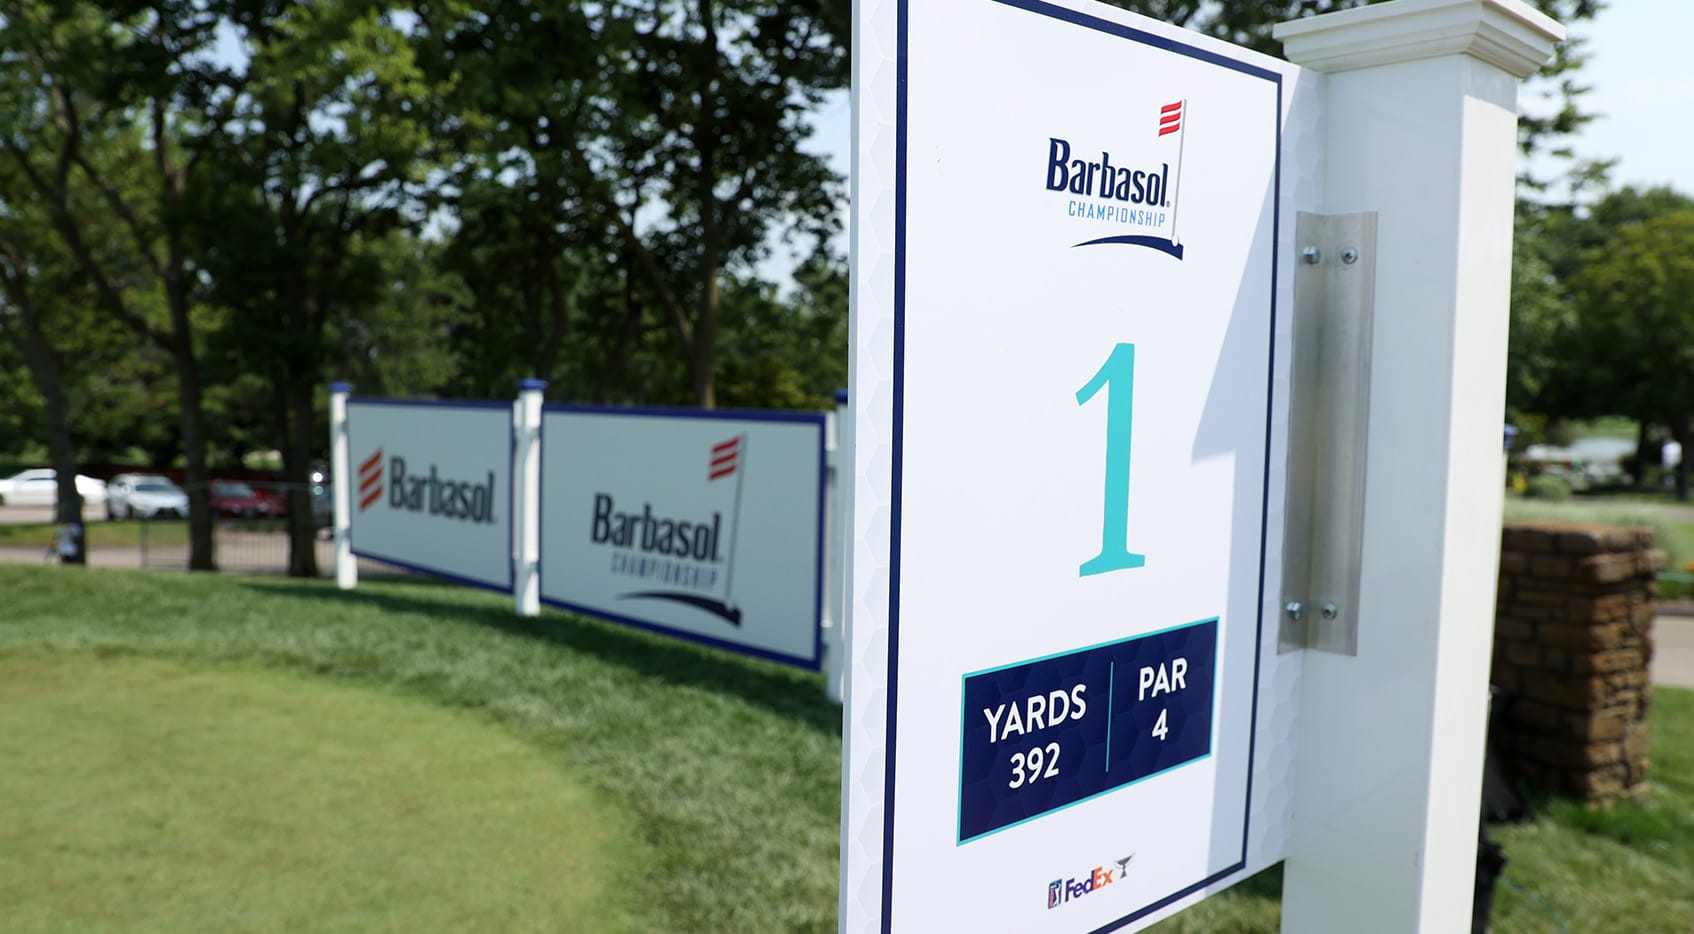 How to Watch the Barbasol Championship, Round 2 Featured Groups, live scores, tee times, TV times